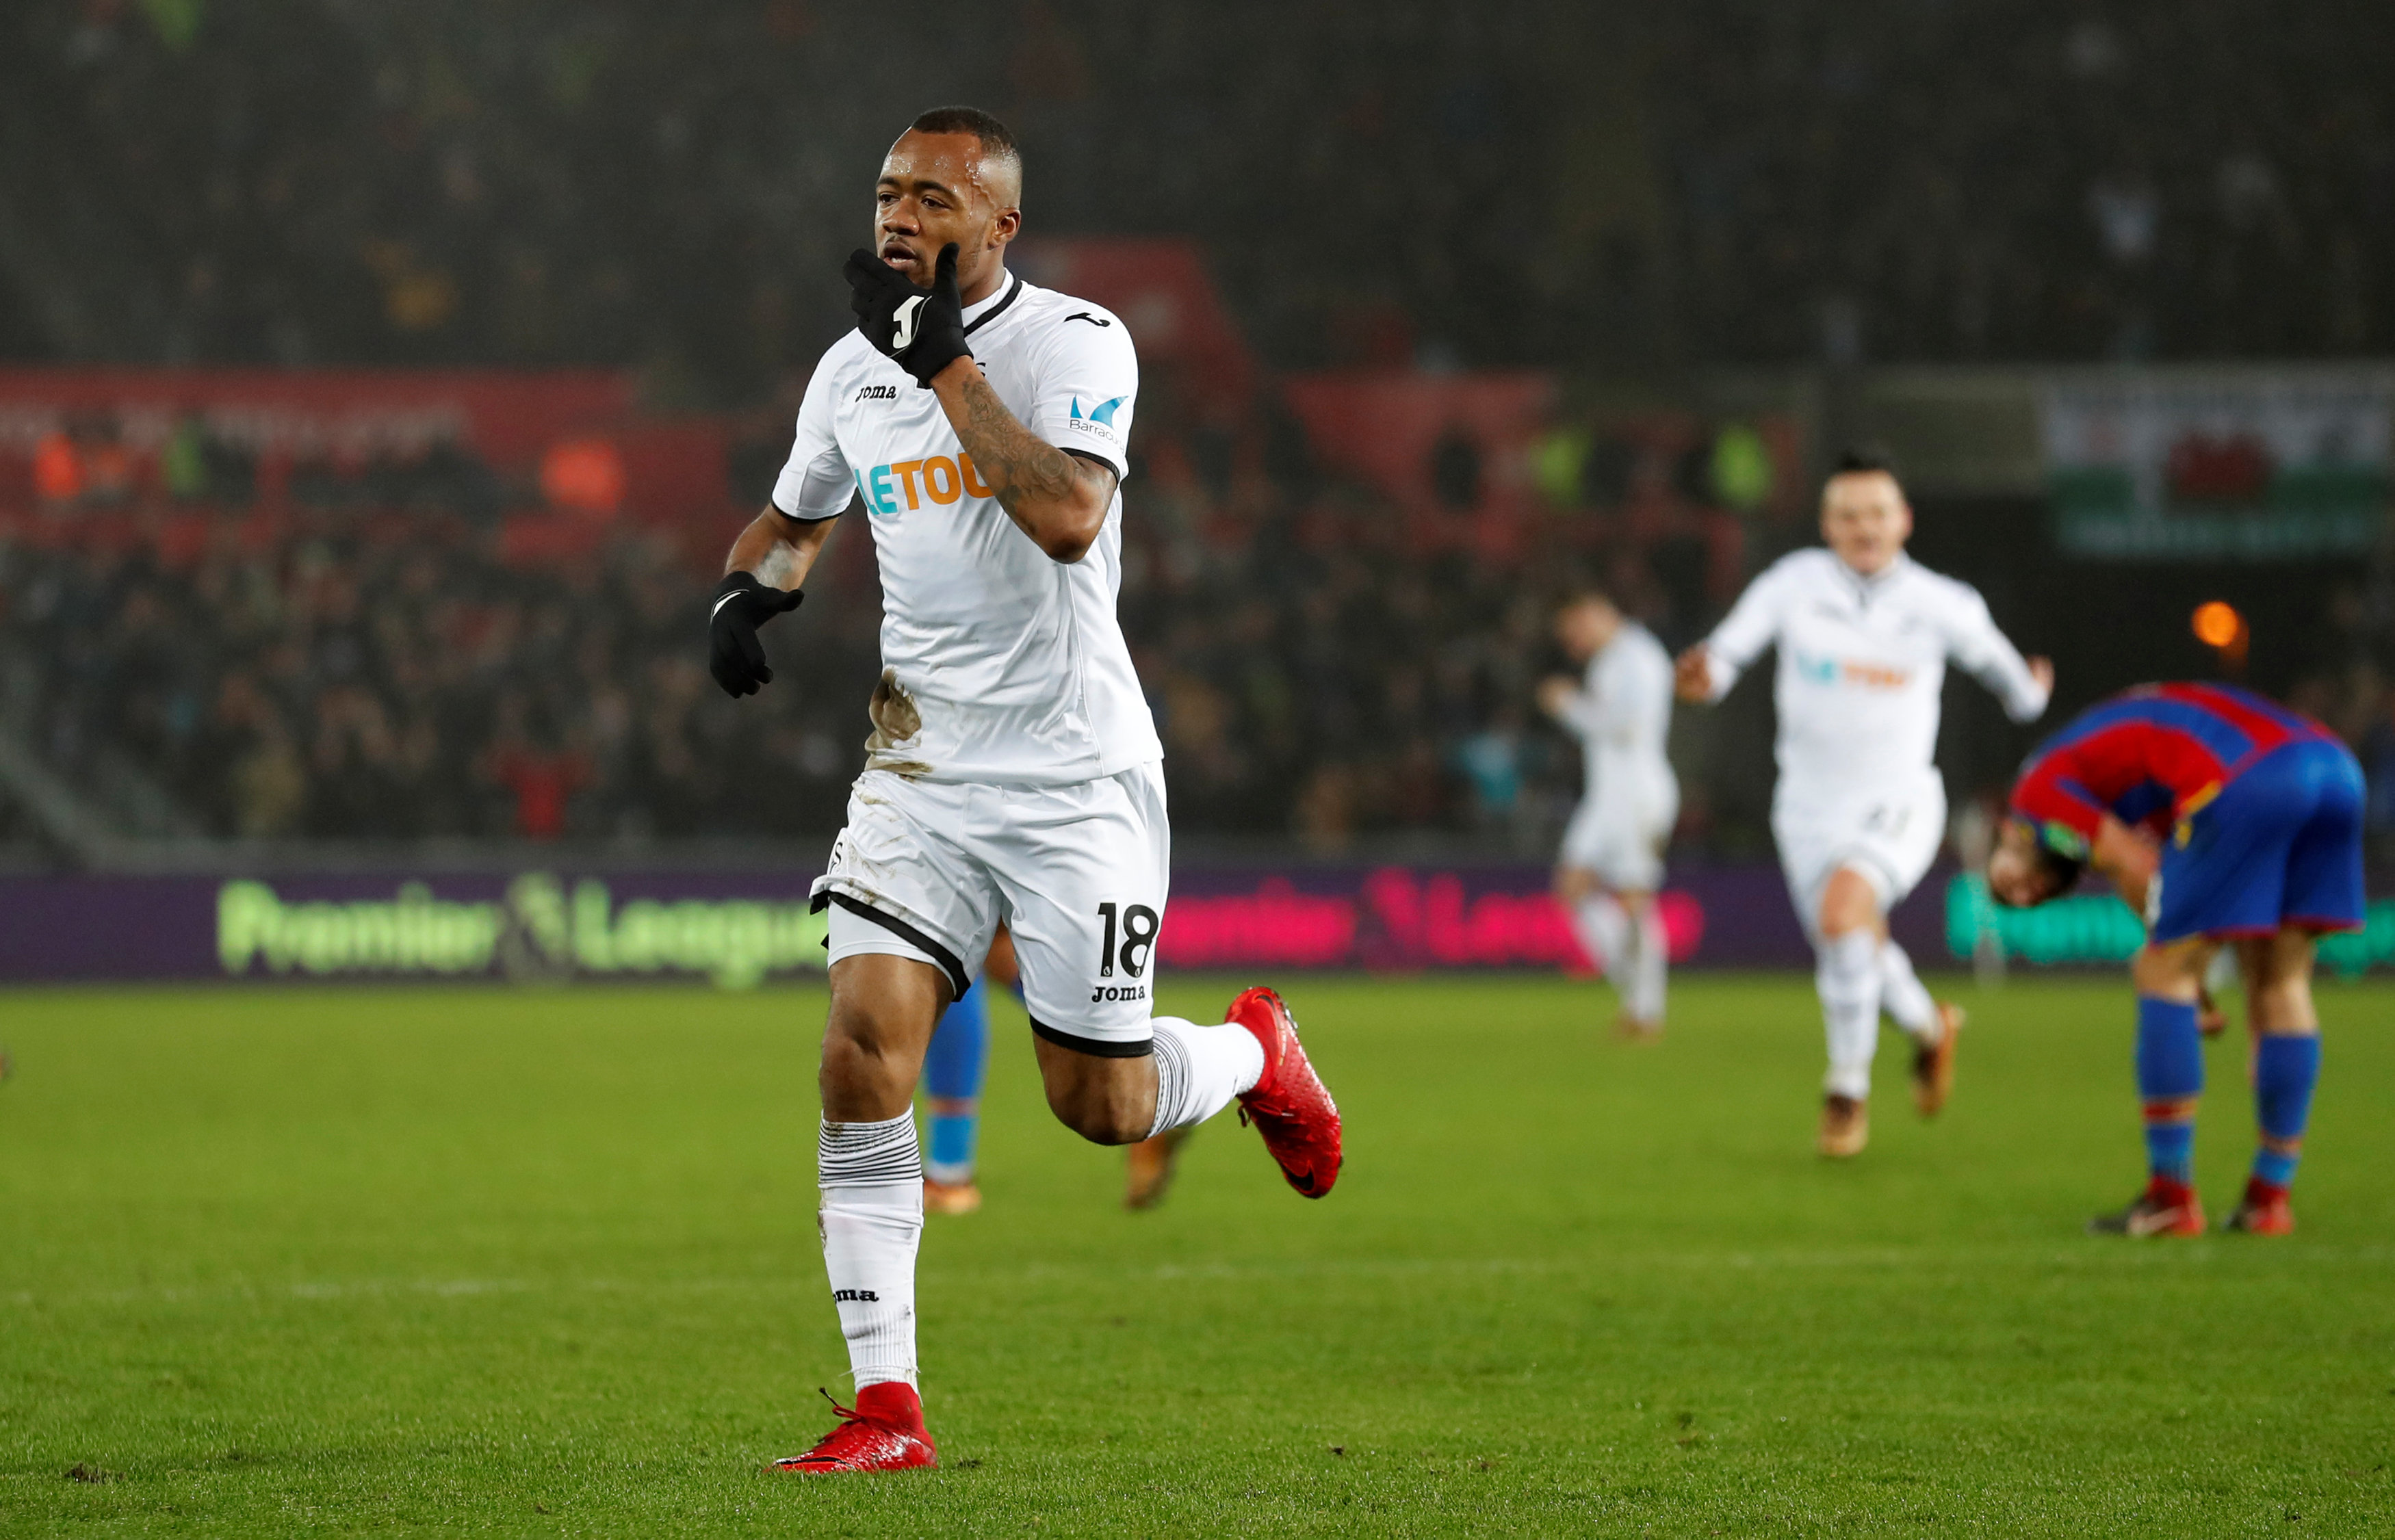 Football: Swansea come from behind to hold Palace